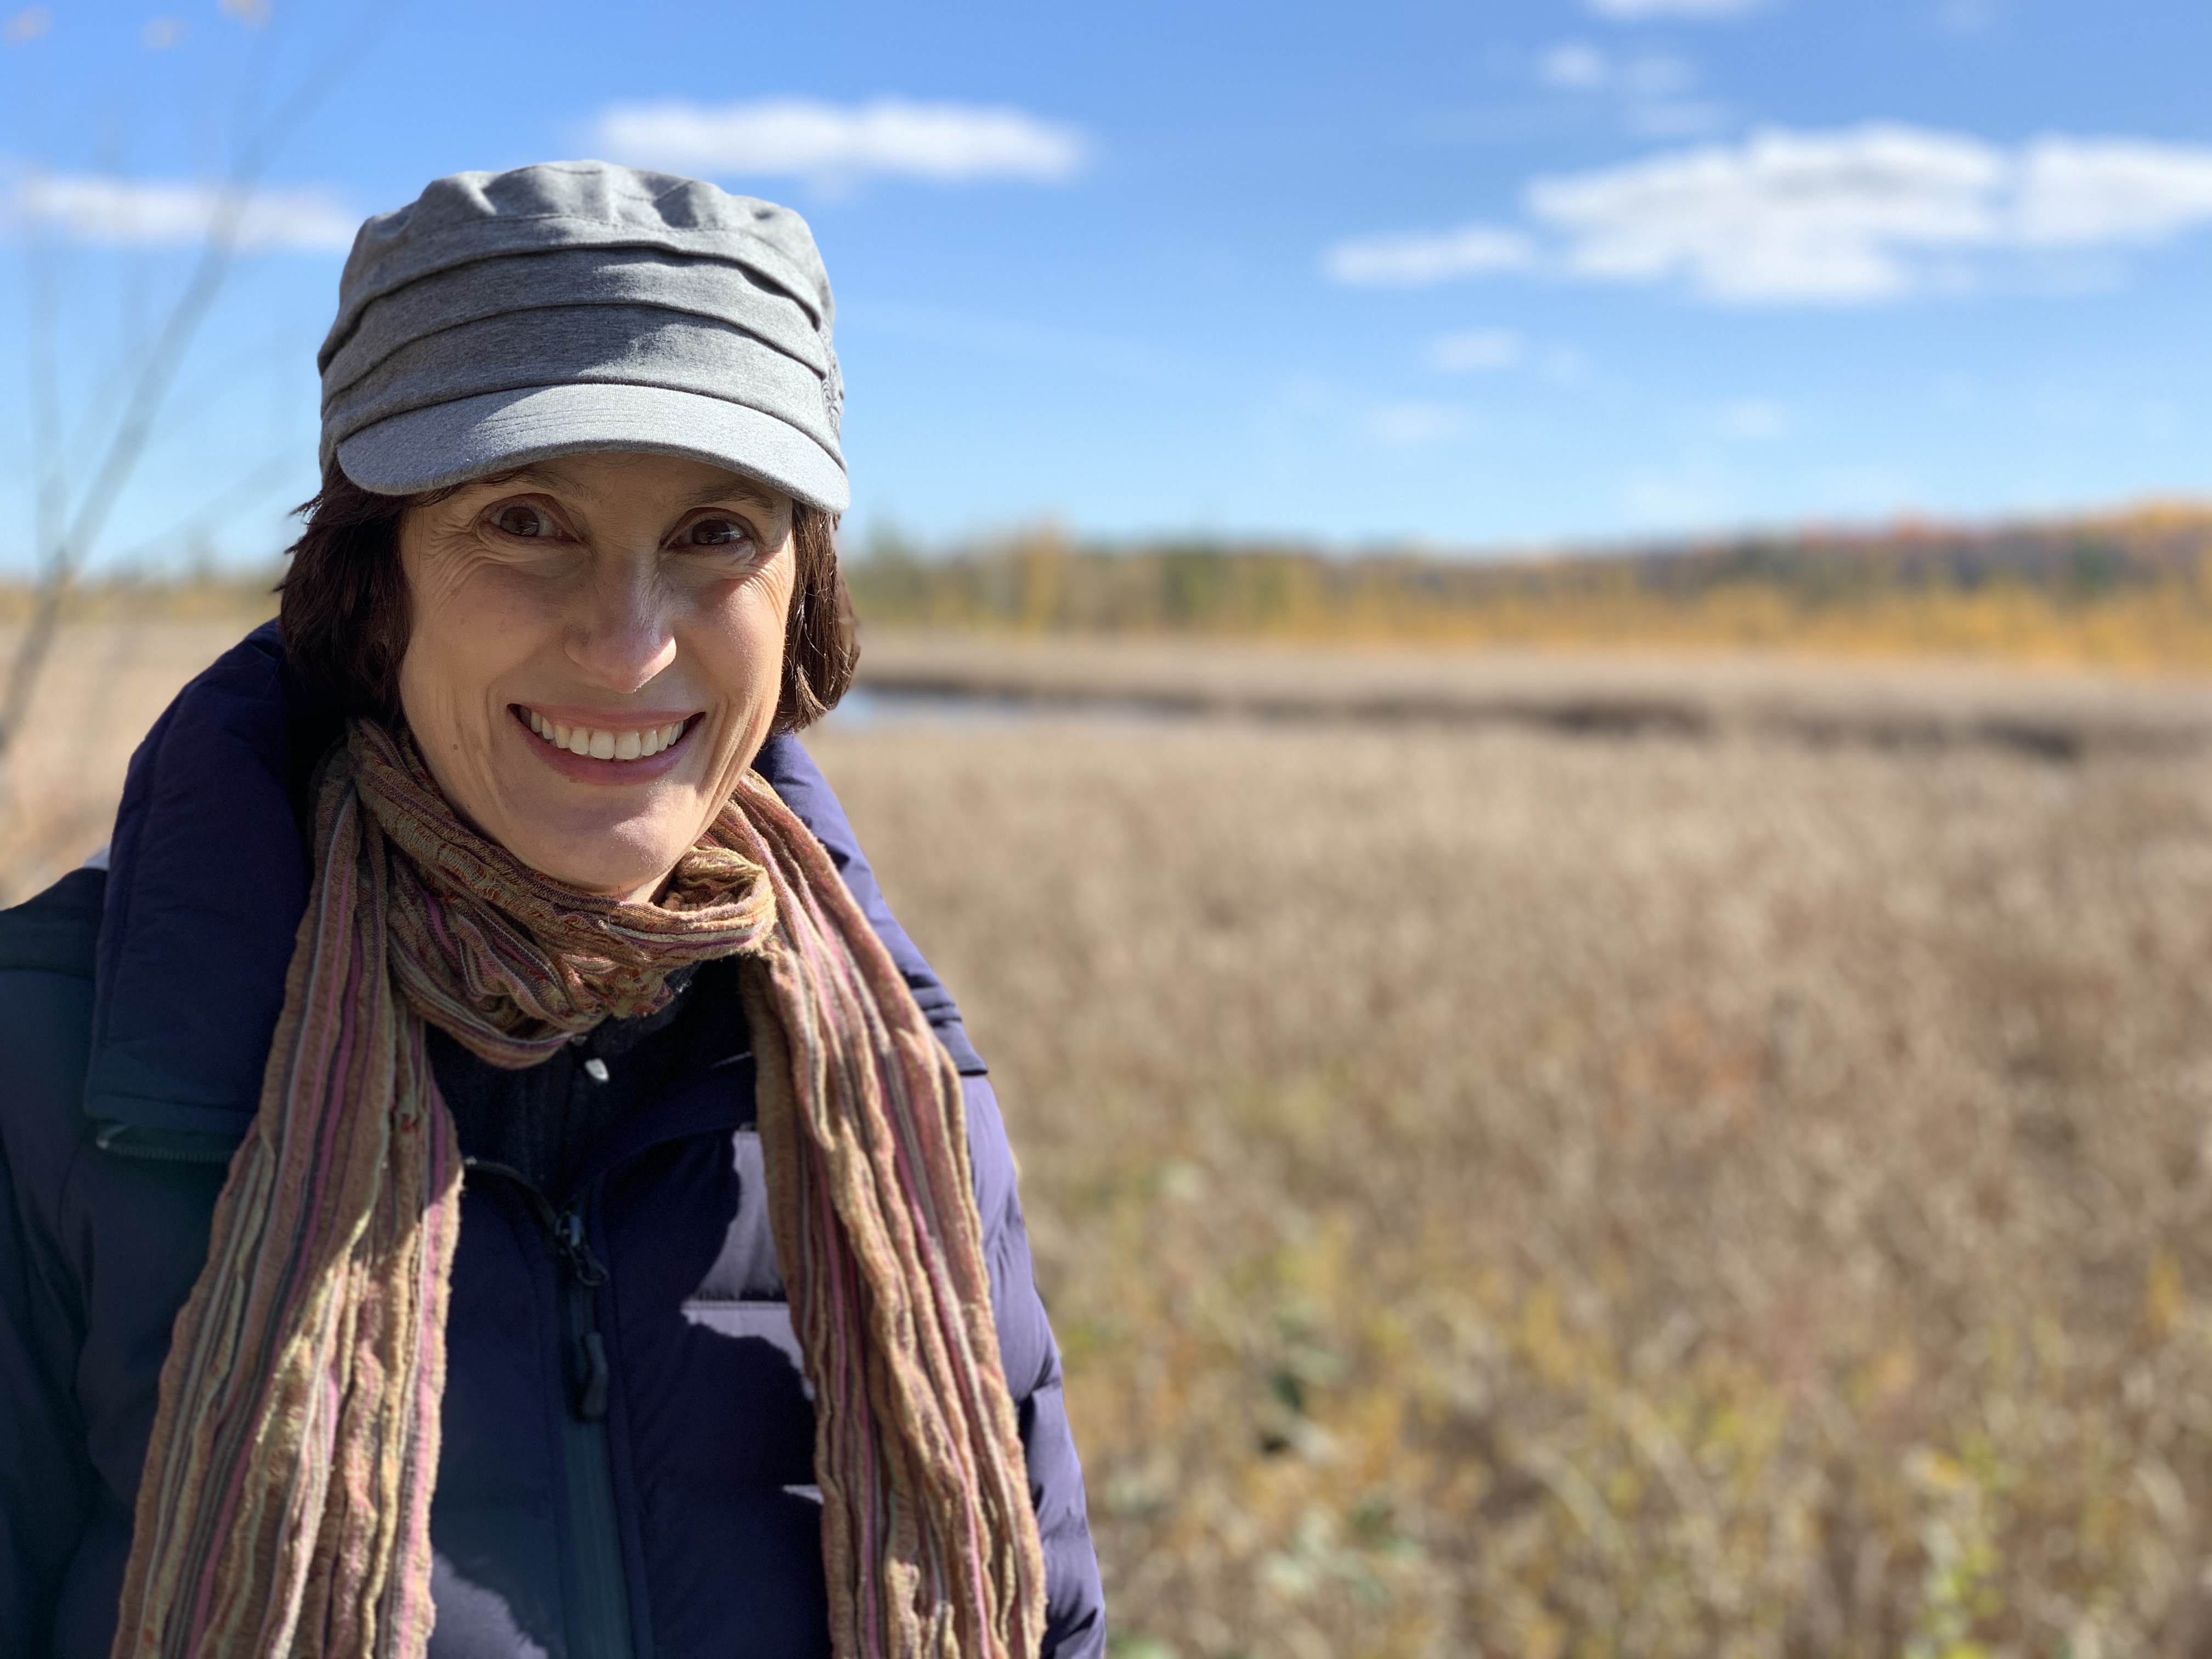 Smiling woman wearing a hat and scarf standing in a field on a sunny day